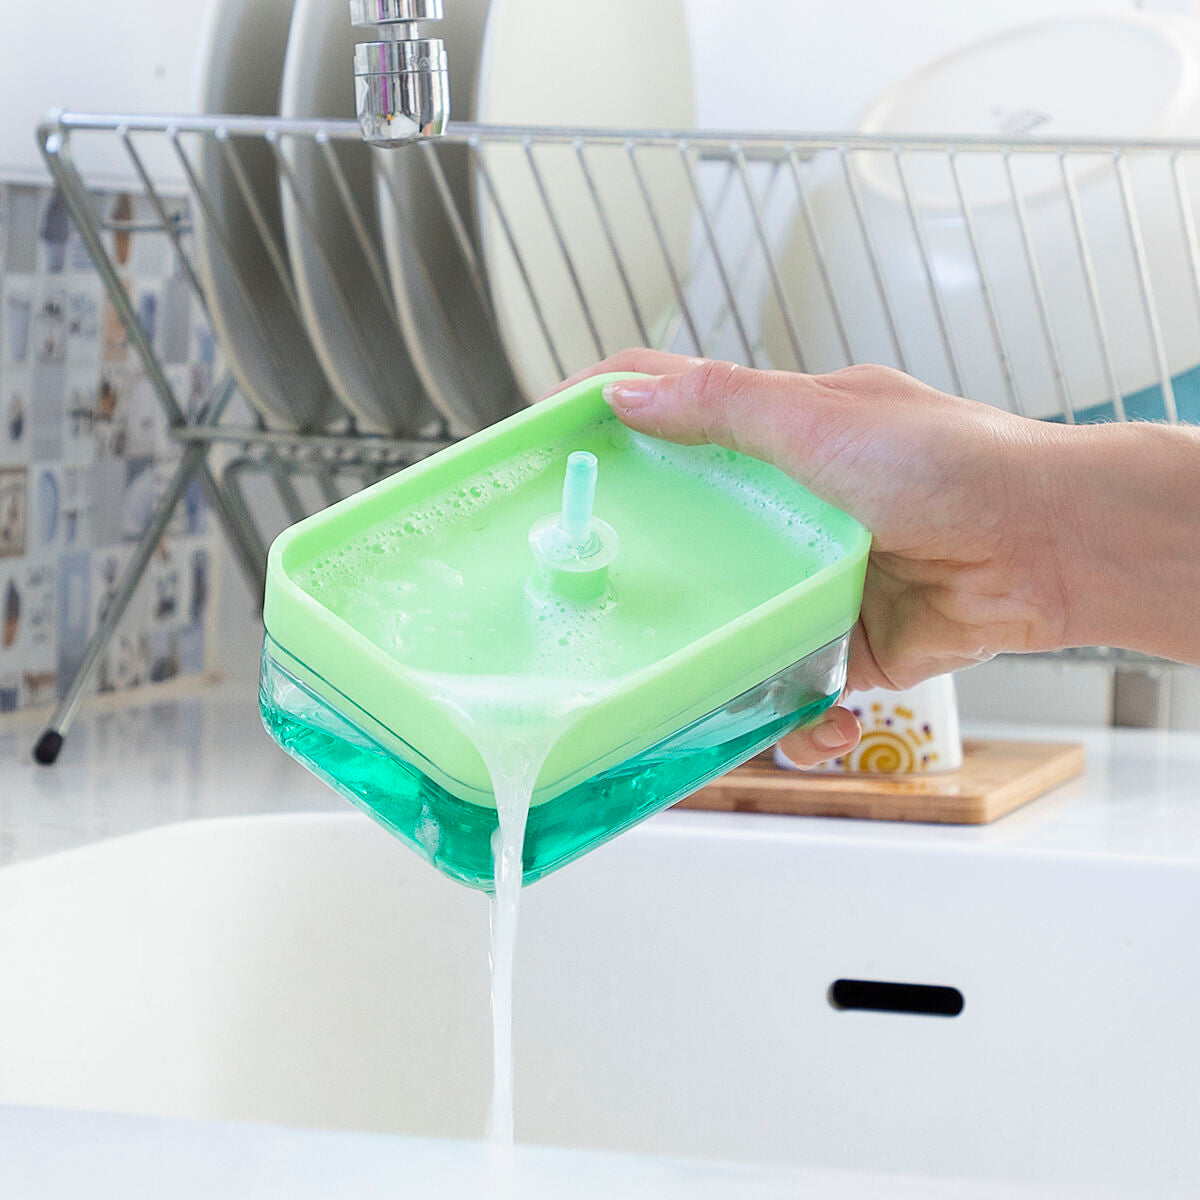 2-in-1 soap dispenser for the kitchen